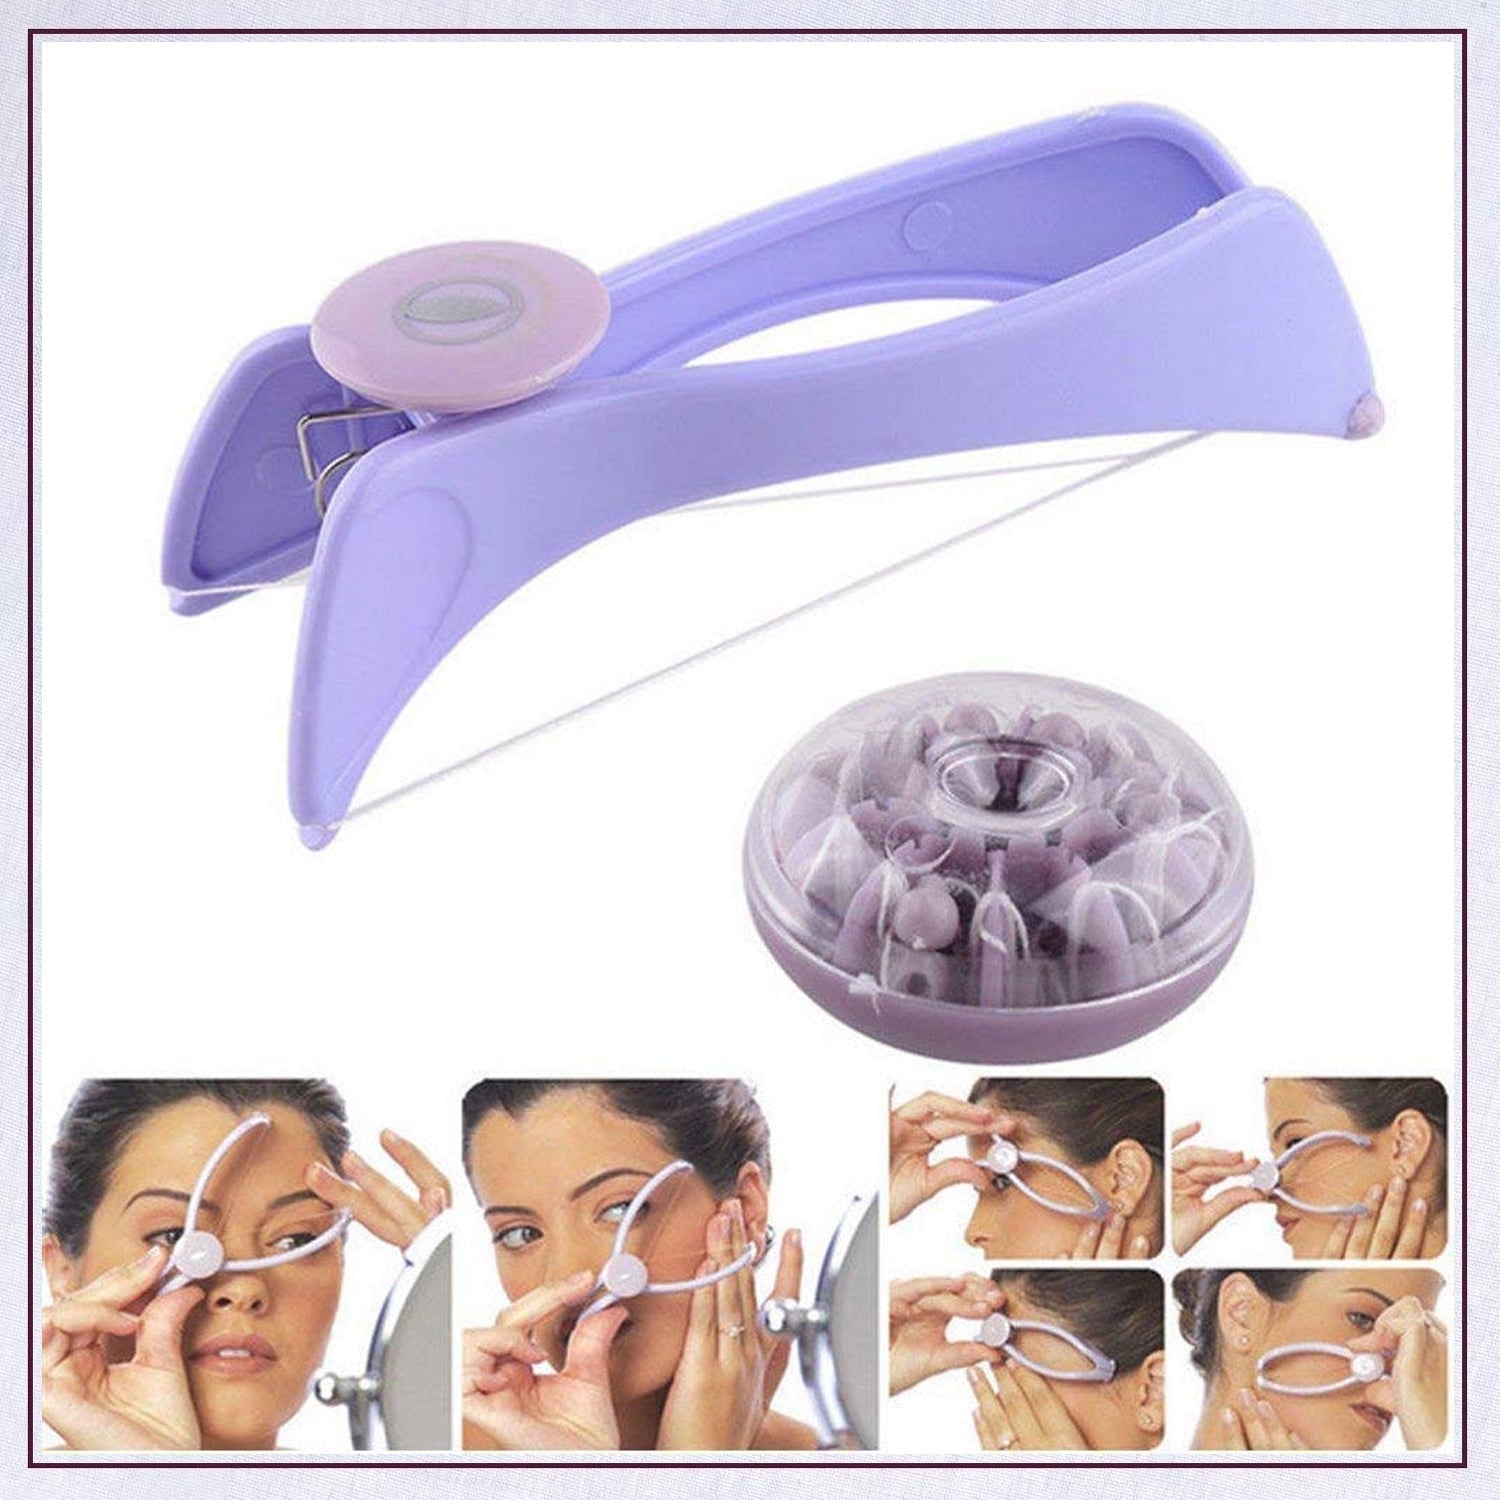 1214A Slique Painless Eyebrow, Upper Lips, Face and Body Hair Removal Threading Manual Tweezer Machine Shaver System Kit DeoDap